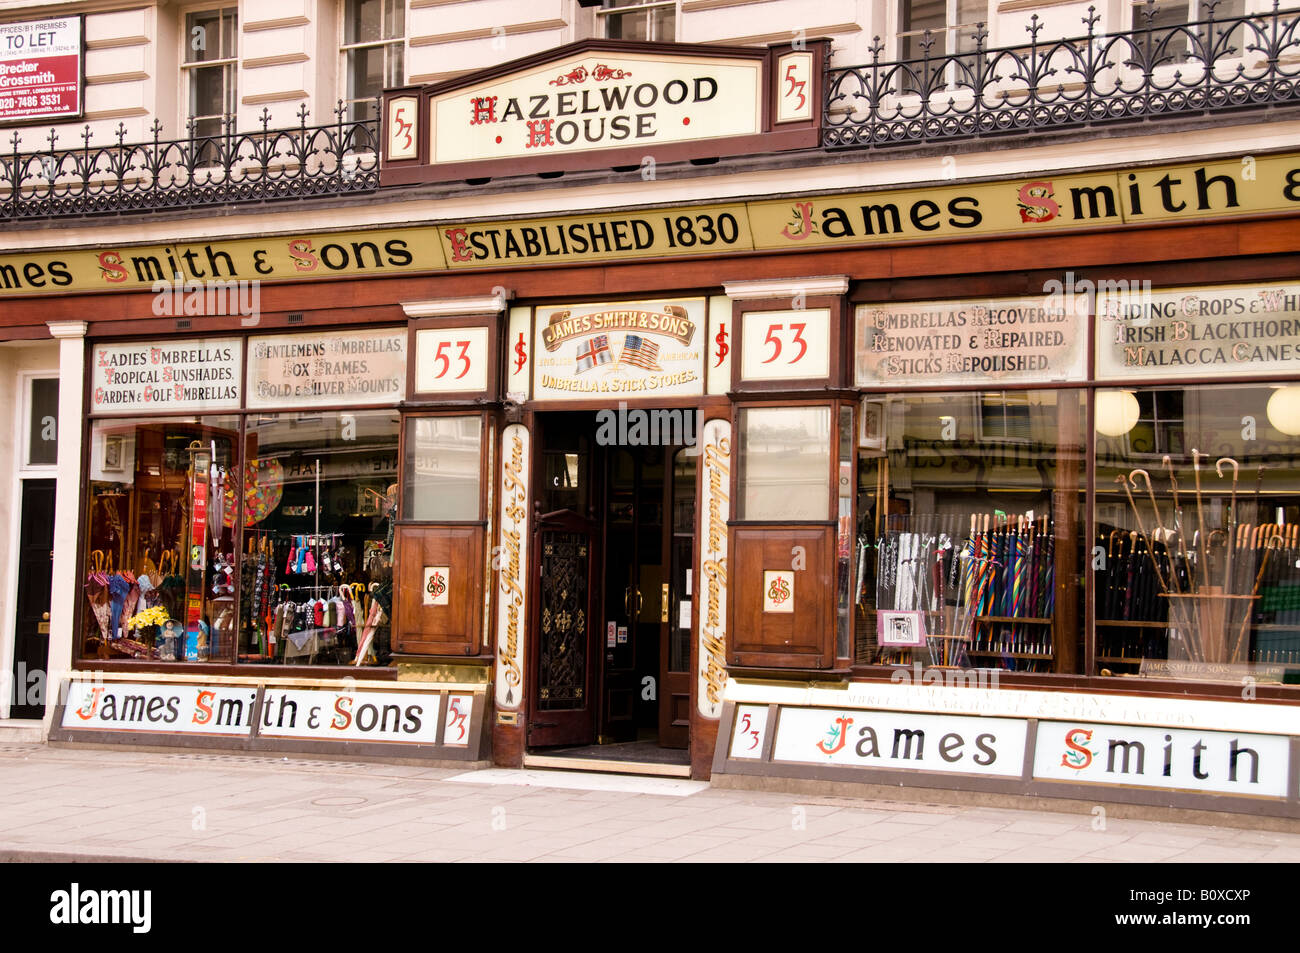 James Smith and Sons, ombrello specialista in Londra, Inghilterra Foto Stock